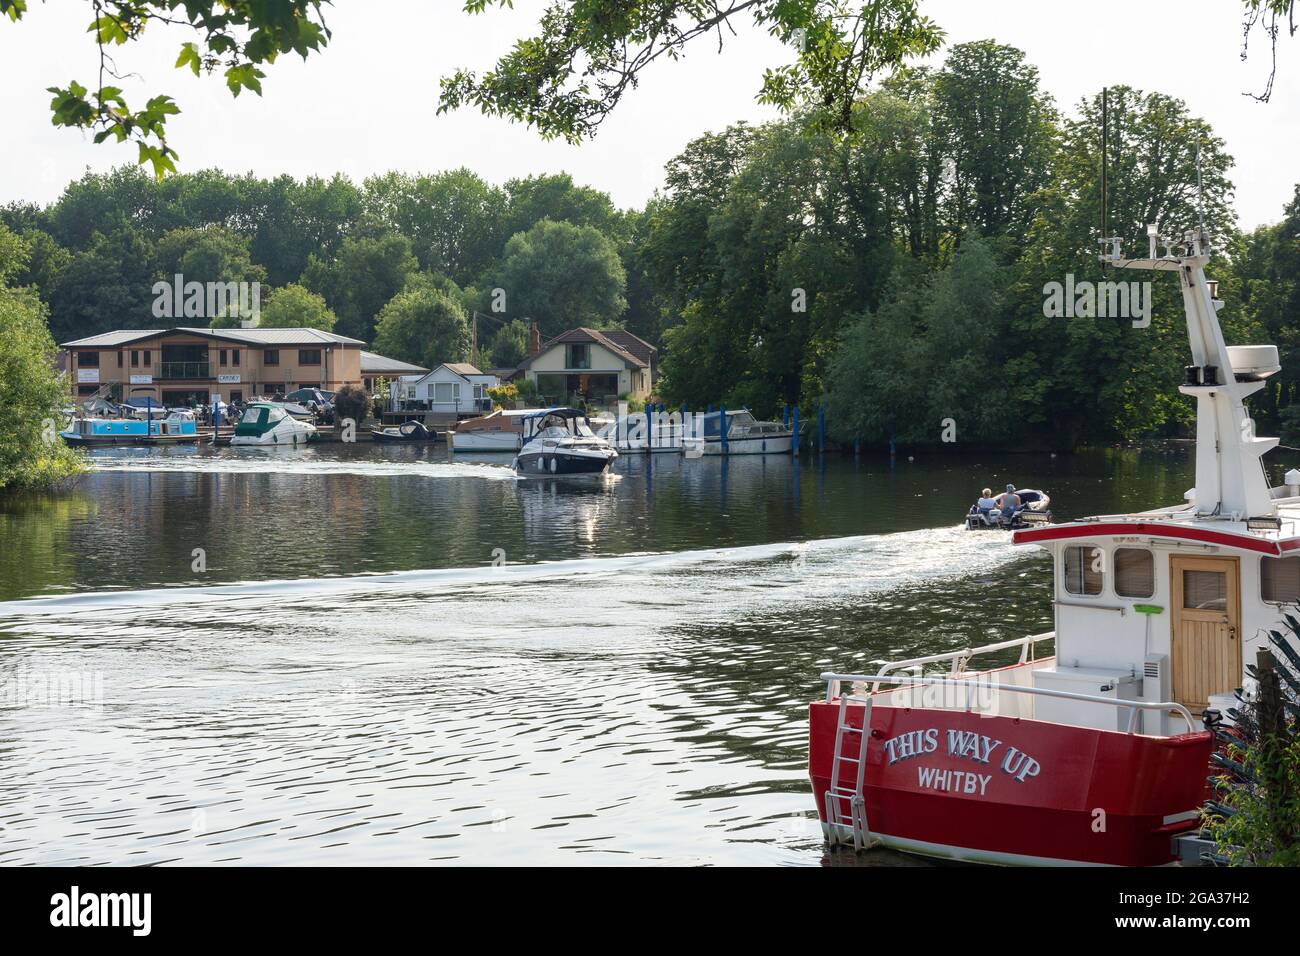 Boating on River Thames, Russell Road, Shepperton, Surrey, England, United Kingdom Stock Photo